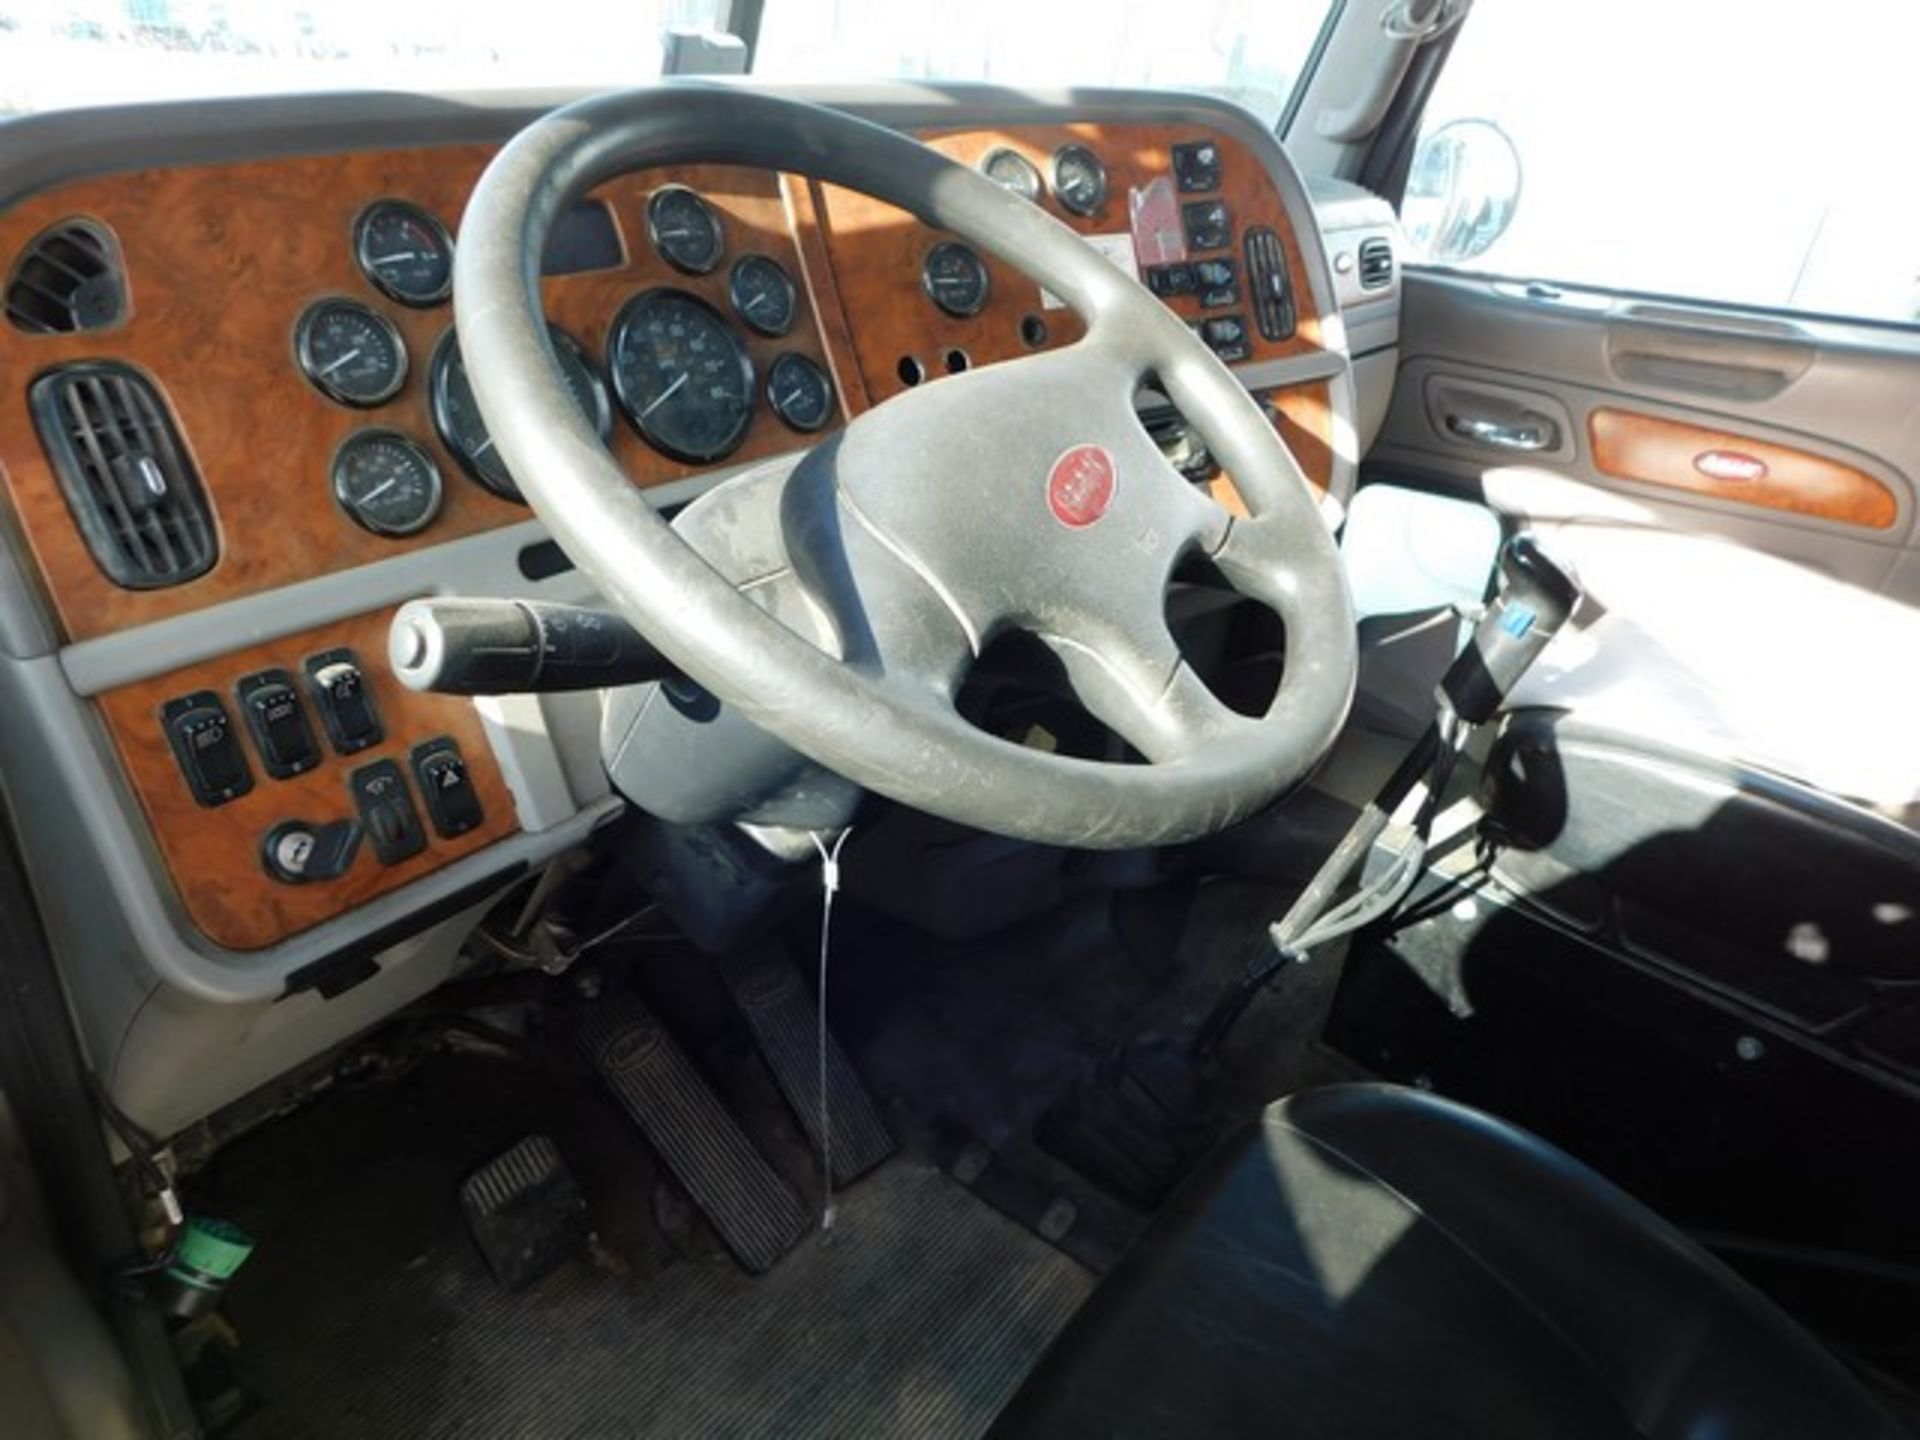 Located in YARD 4 - Massillon, OH - (CTB-018) (X) 2008 PETERBUILT 367 TRI DRIVE, - Image 9 of 9